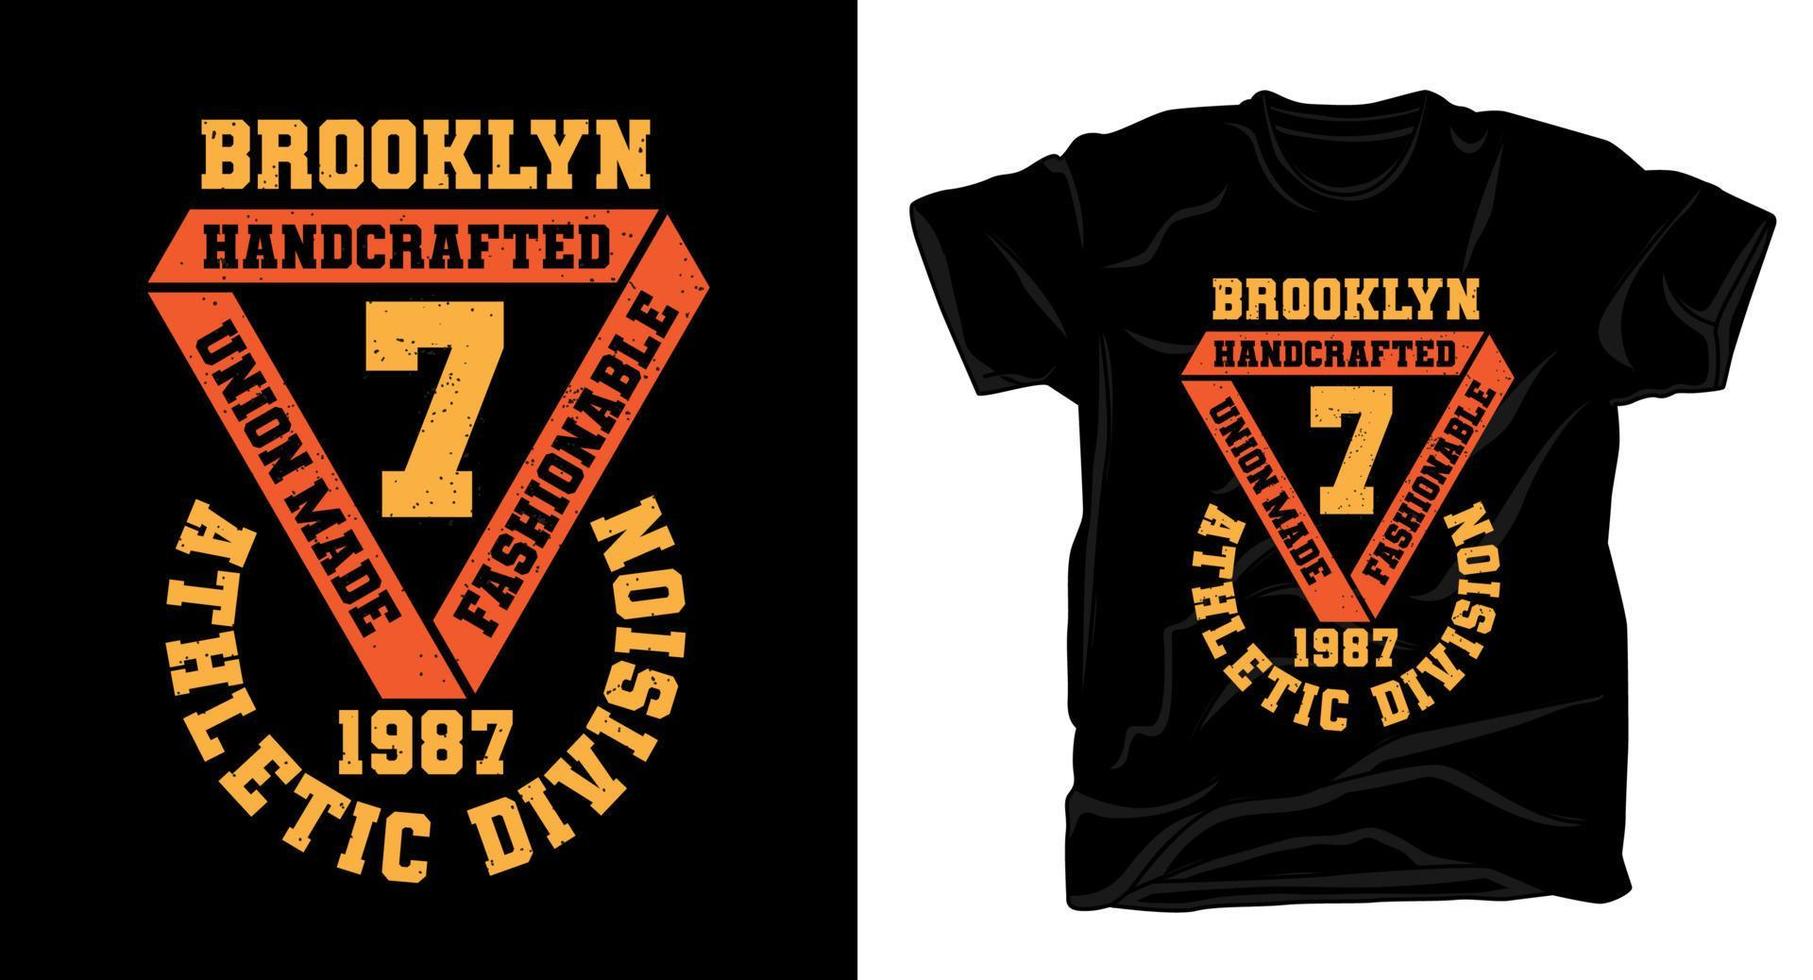 Brooklyn seven athletic division typography t-shirt design vector